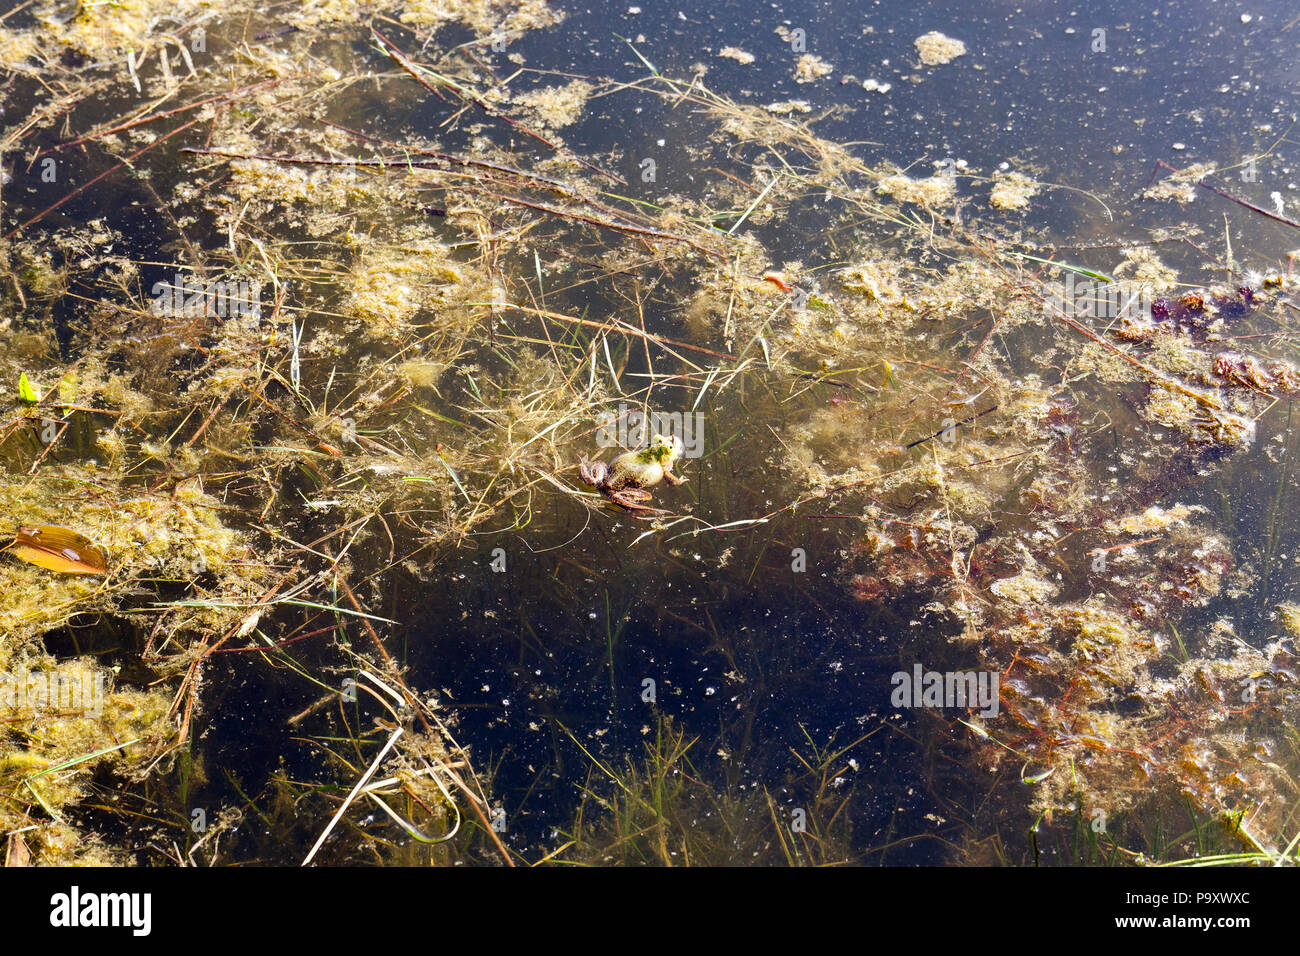 wildlife, a green frog in camouflage hid in dirty swamp water, closeup in the spring Stock Photo